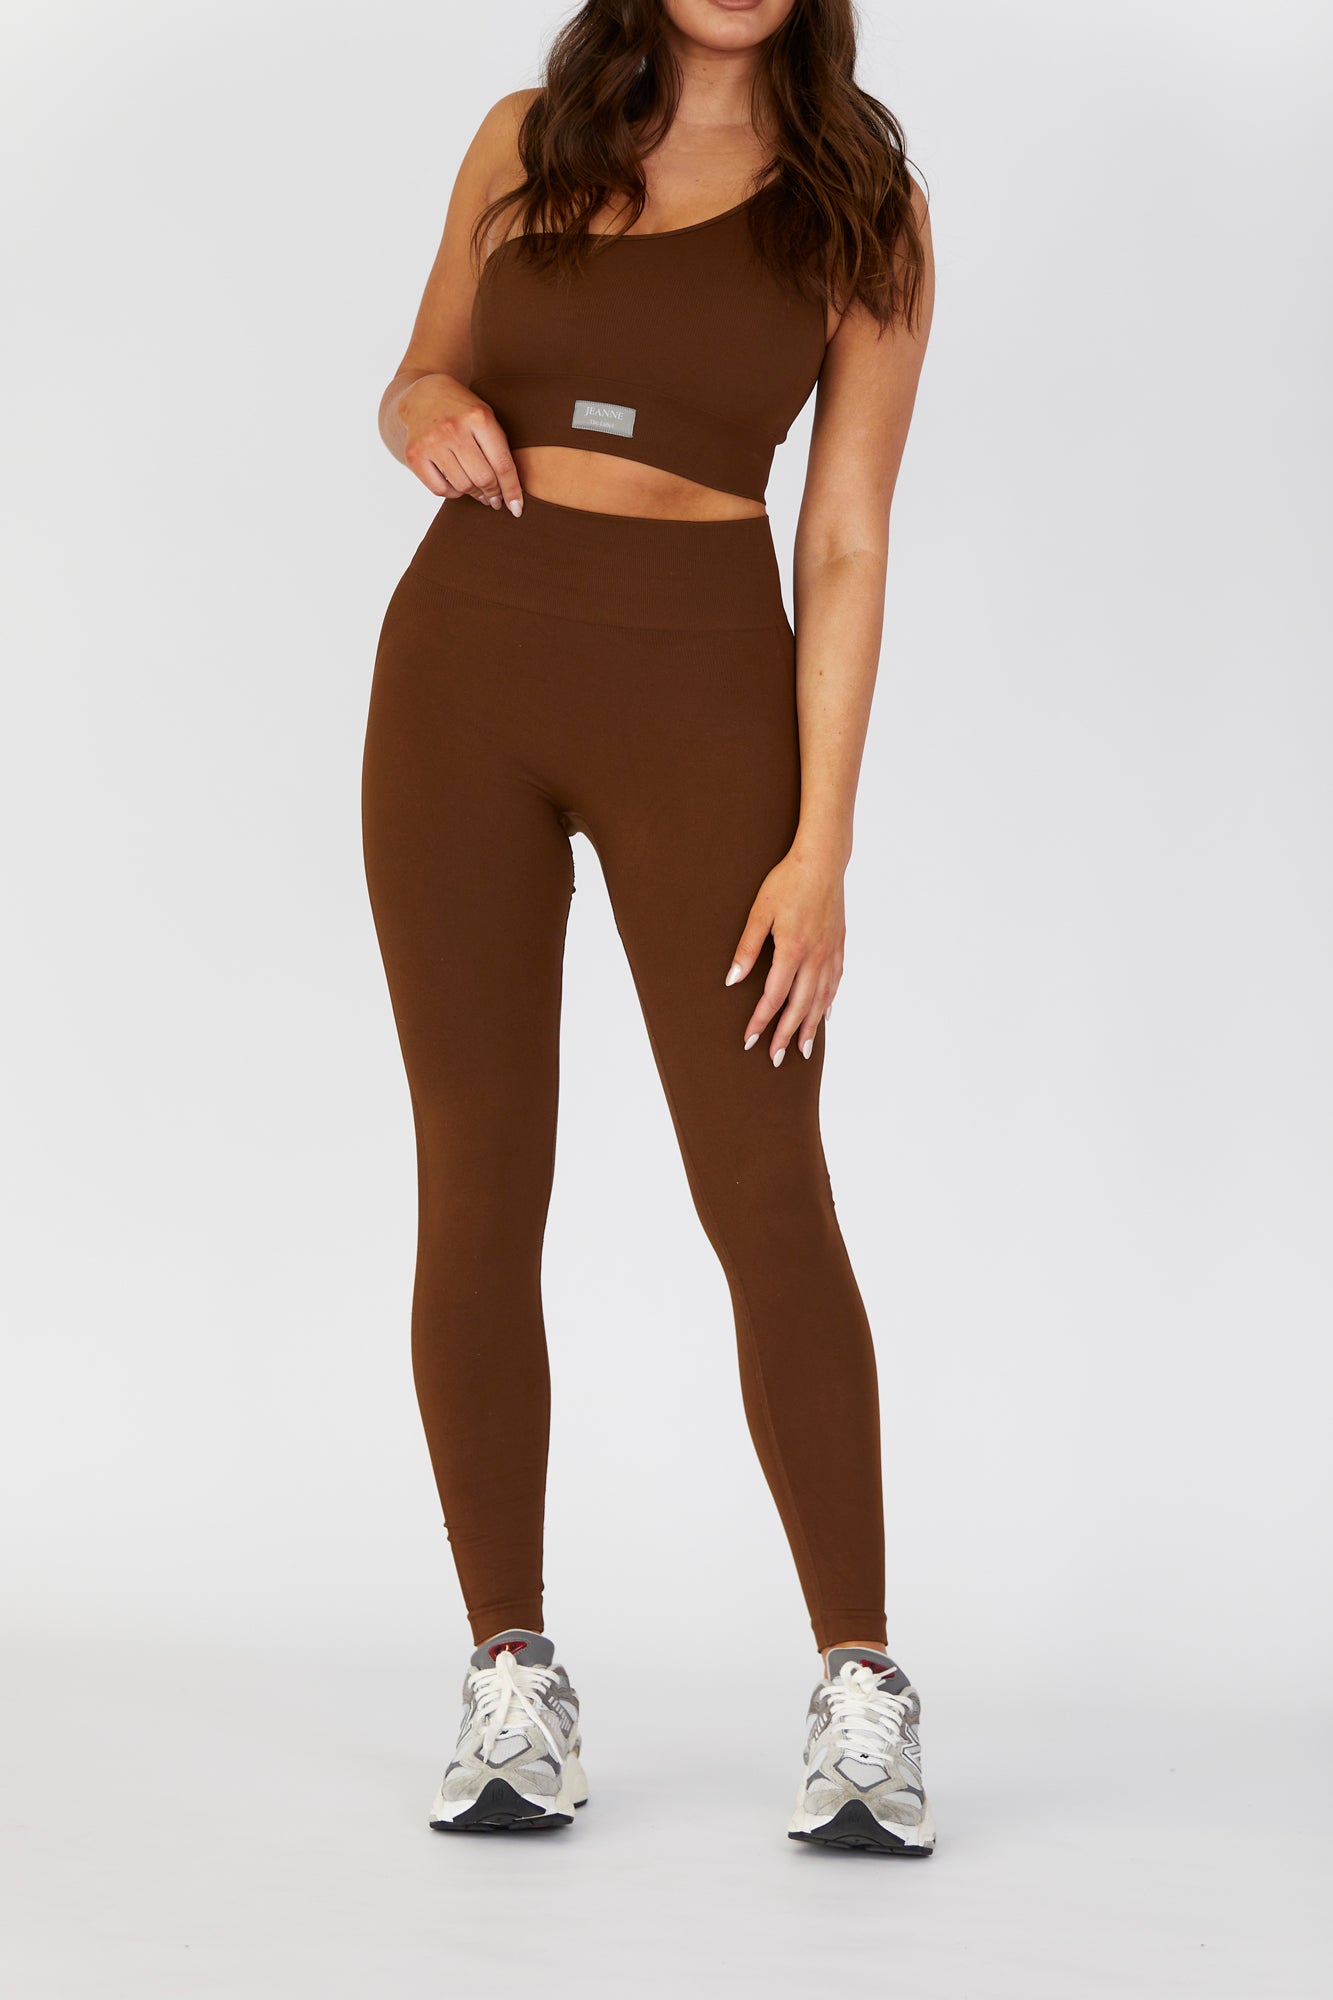 pcheebum  NEW Pchee Essential Mocha Tee and Legging Set is now